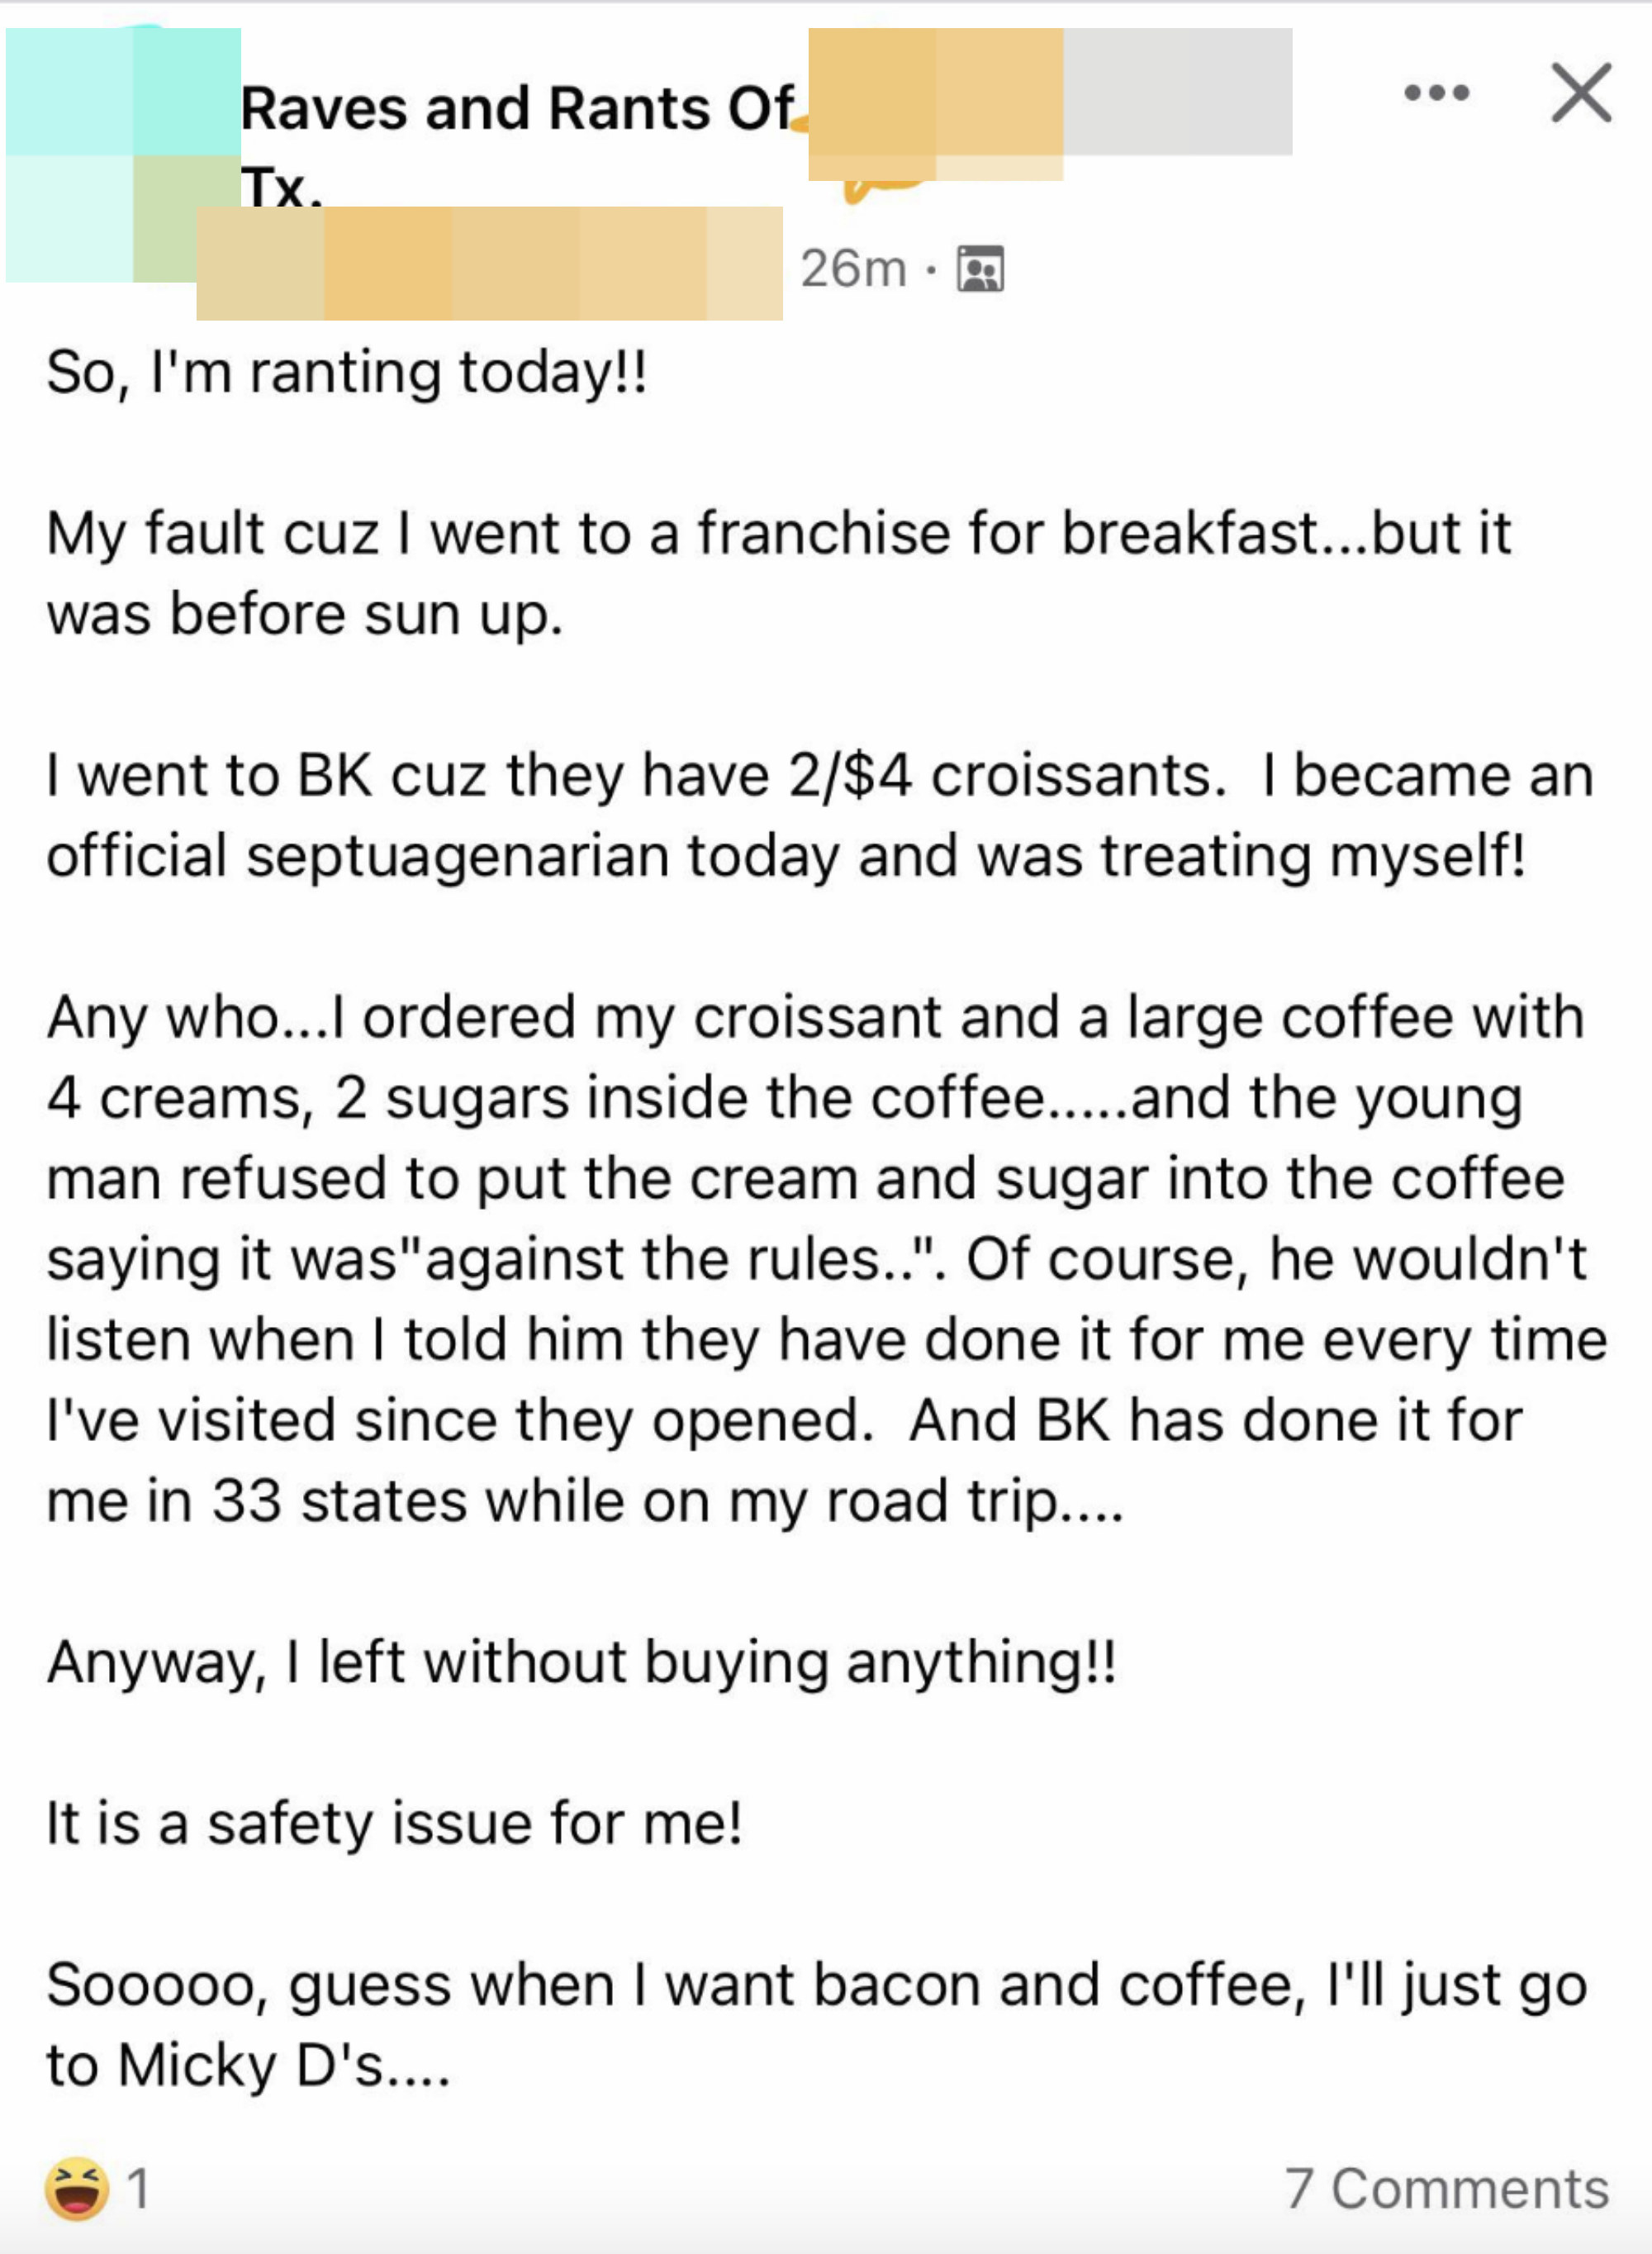 &quot;Official septuagenarian&quot; complained about Burger King employee not putting their 4 creams, 2 sugars into their large coffee &#x27;cause it&#x27;s &quot;against the rules,&quot; so they left w/o buying anything and will go to Micky D&#x27;s in the future